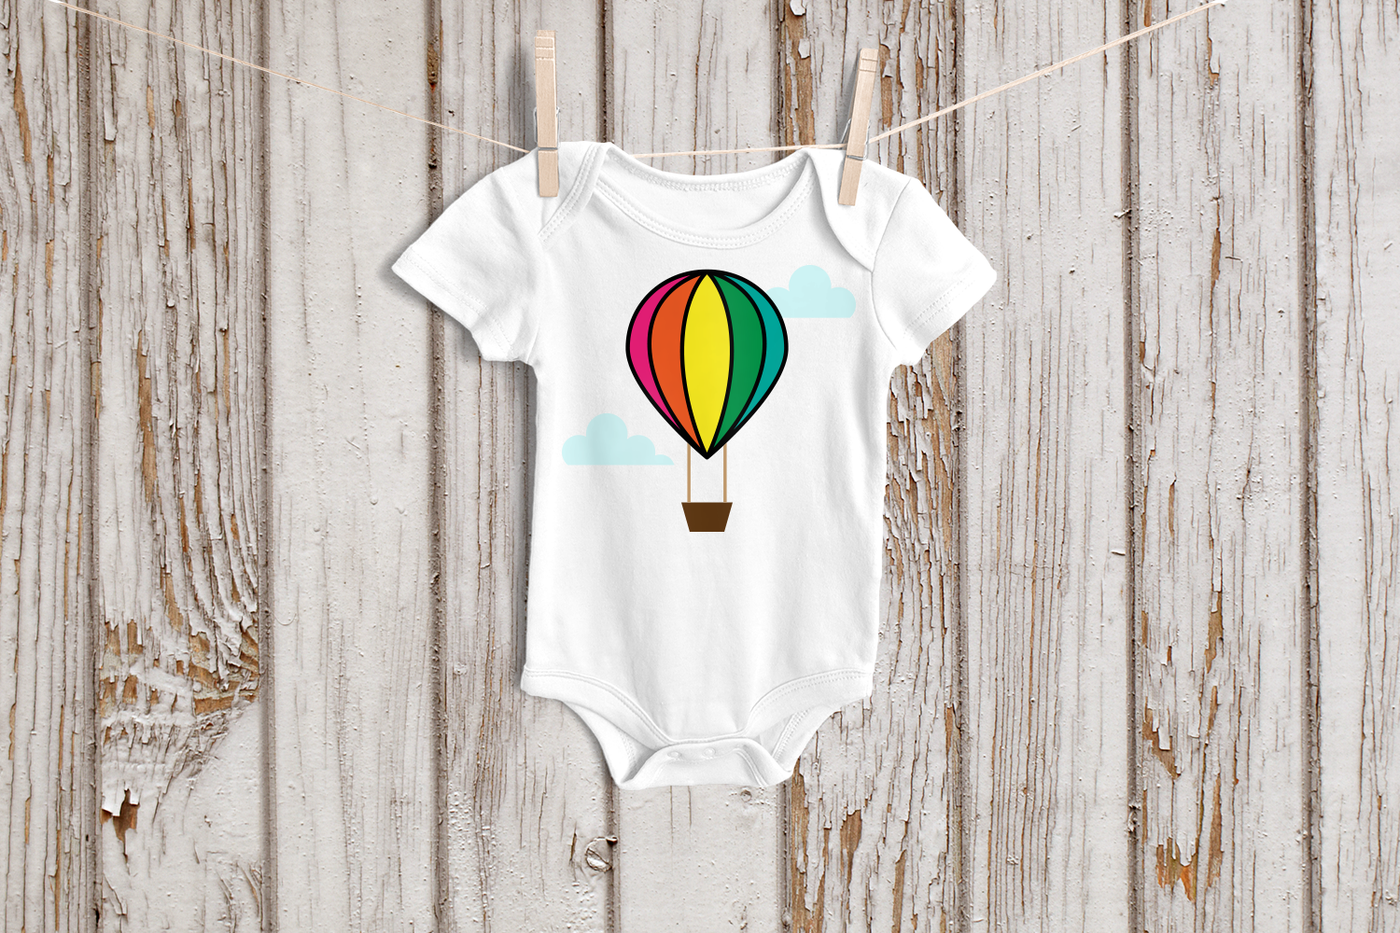 Hot air balloon with clouds design on a baby onesie.